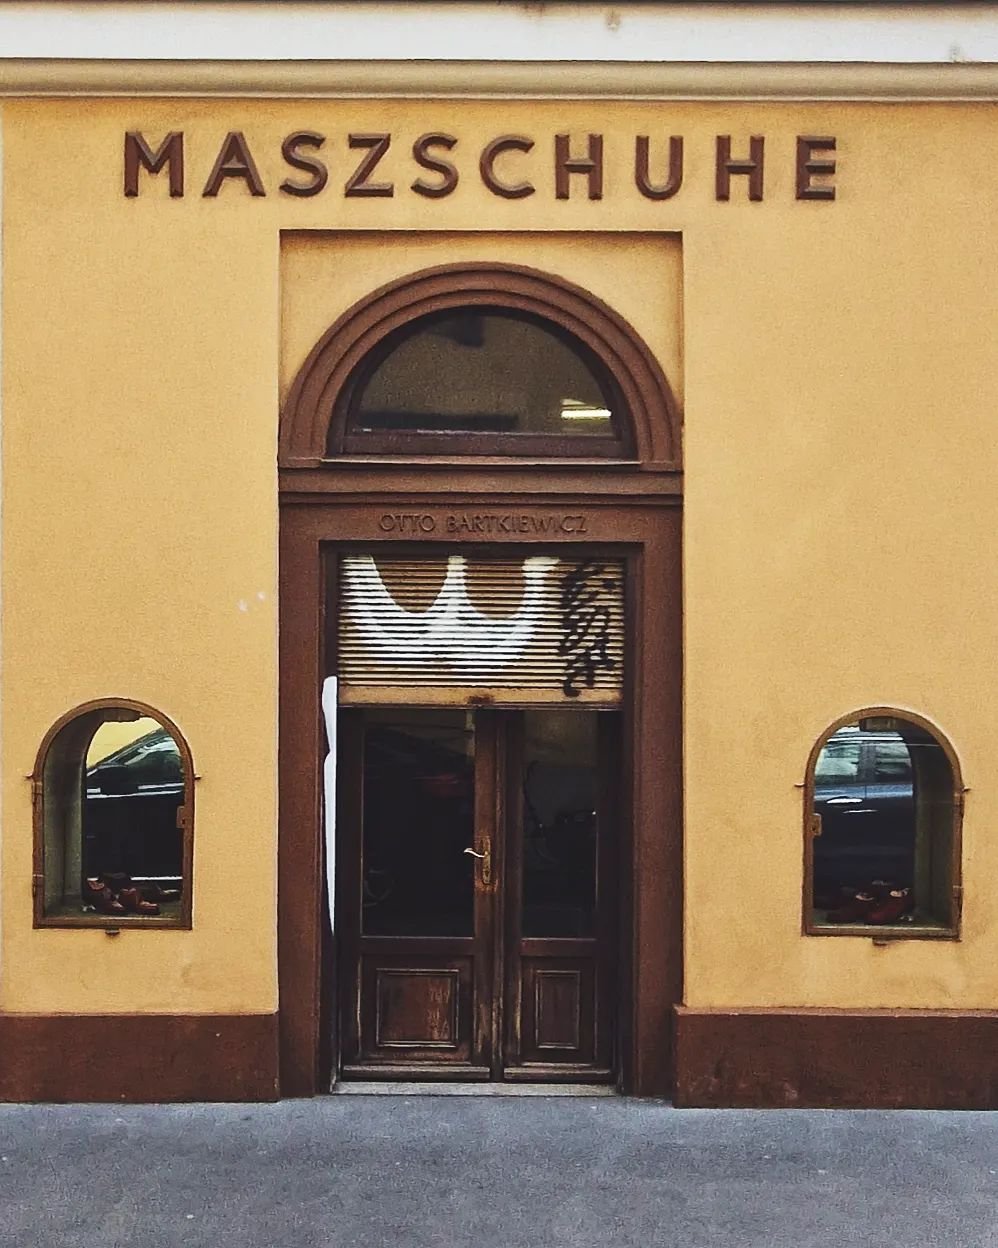 Dorotheergasse, 1010
#
#font #schrift #abc #type #typo #typografir #typography #letters #lettering #shopfront #foundtype #typeporn #dailytype #dailyfont #wien #vienna #wienfont #fontwien #curated #city #1010 #austria #storefront #shopfrontspoetry #wi